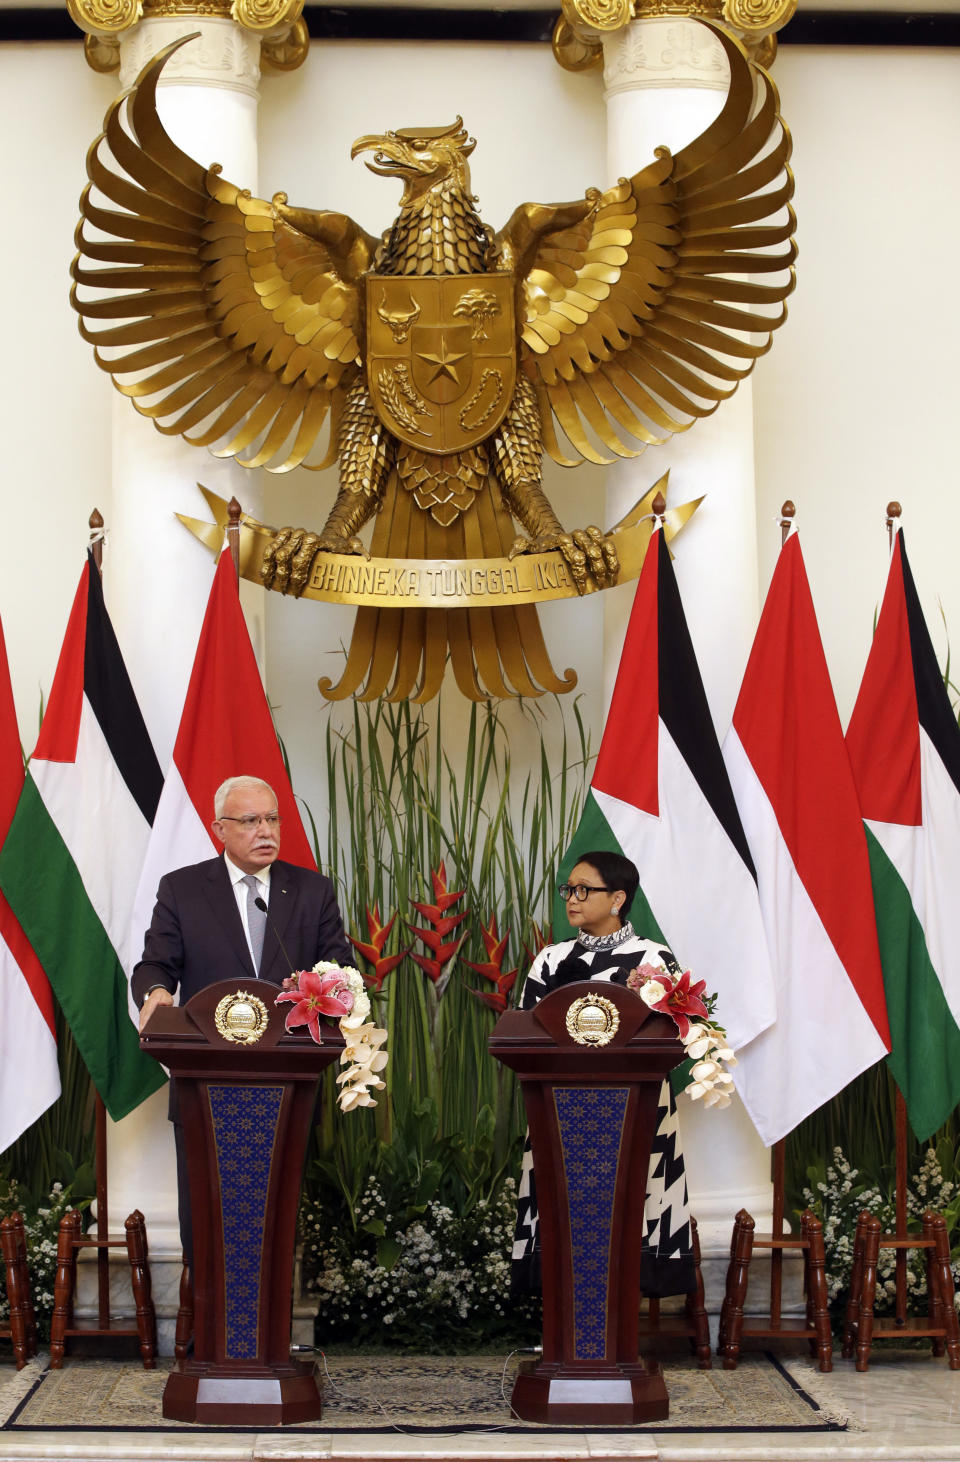 Palestinian Foreign Minister Riyad al-Maliki, left, talks to journalists during a joint press conference with Indonesian Foreign Minister Retno Marsudi in Jakarta, Indonesia, Tuesday, Oct. 16, 2018. (AP Photo/Achmad Ibrahim)